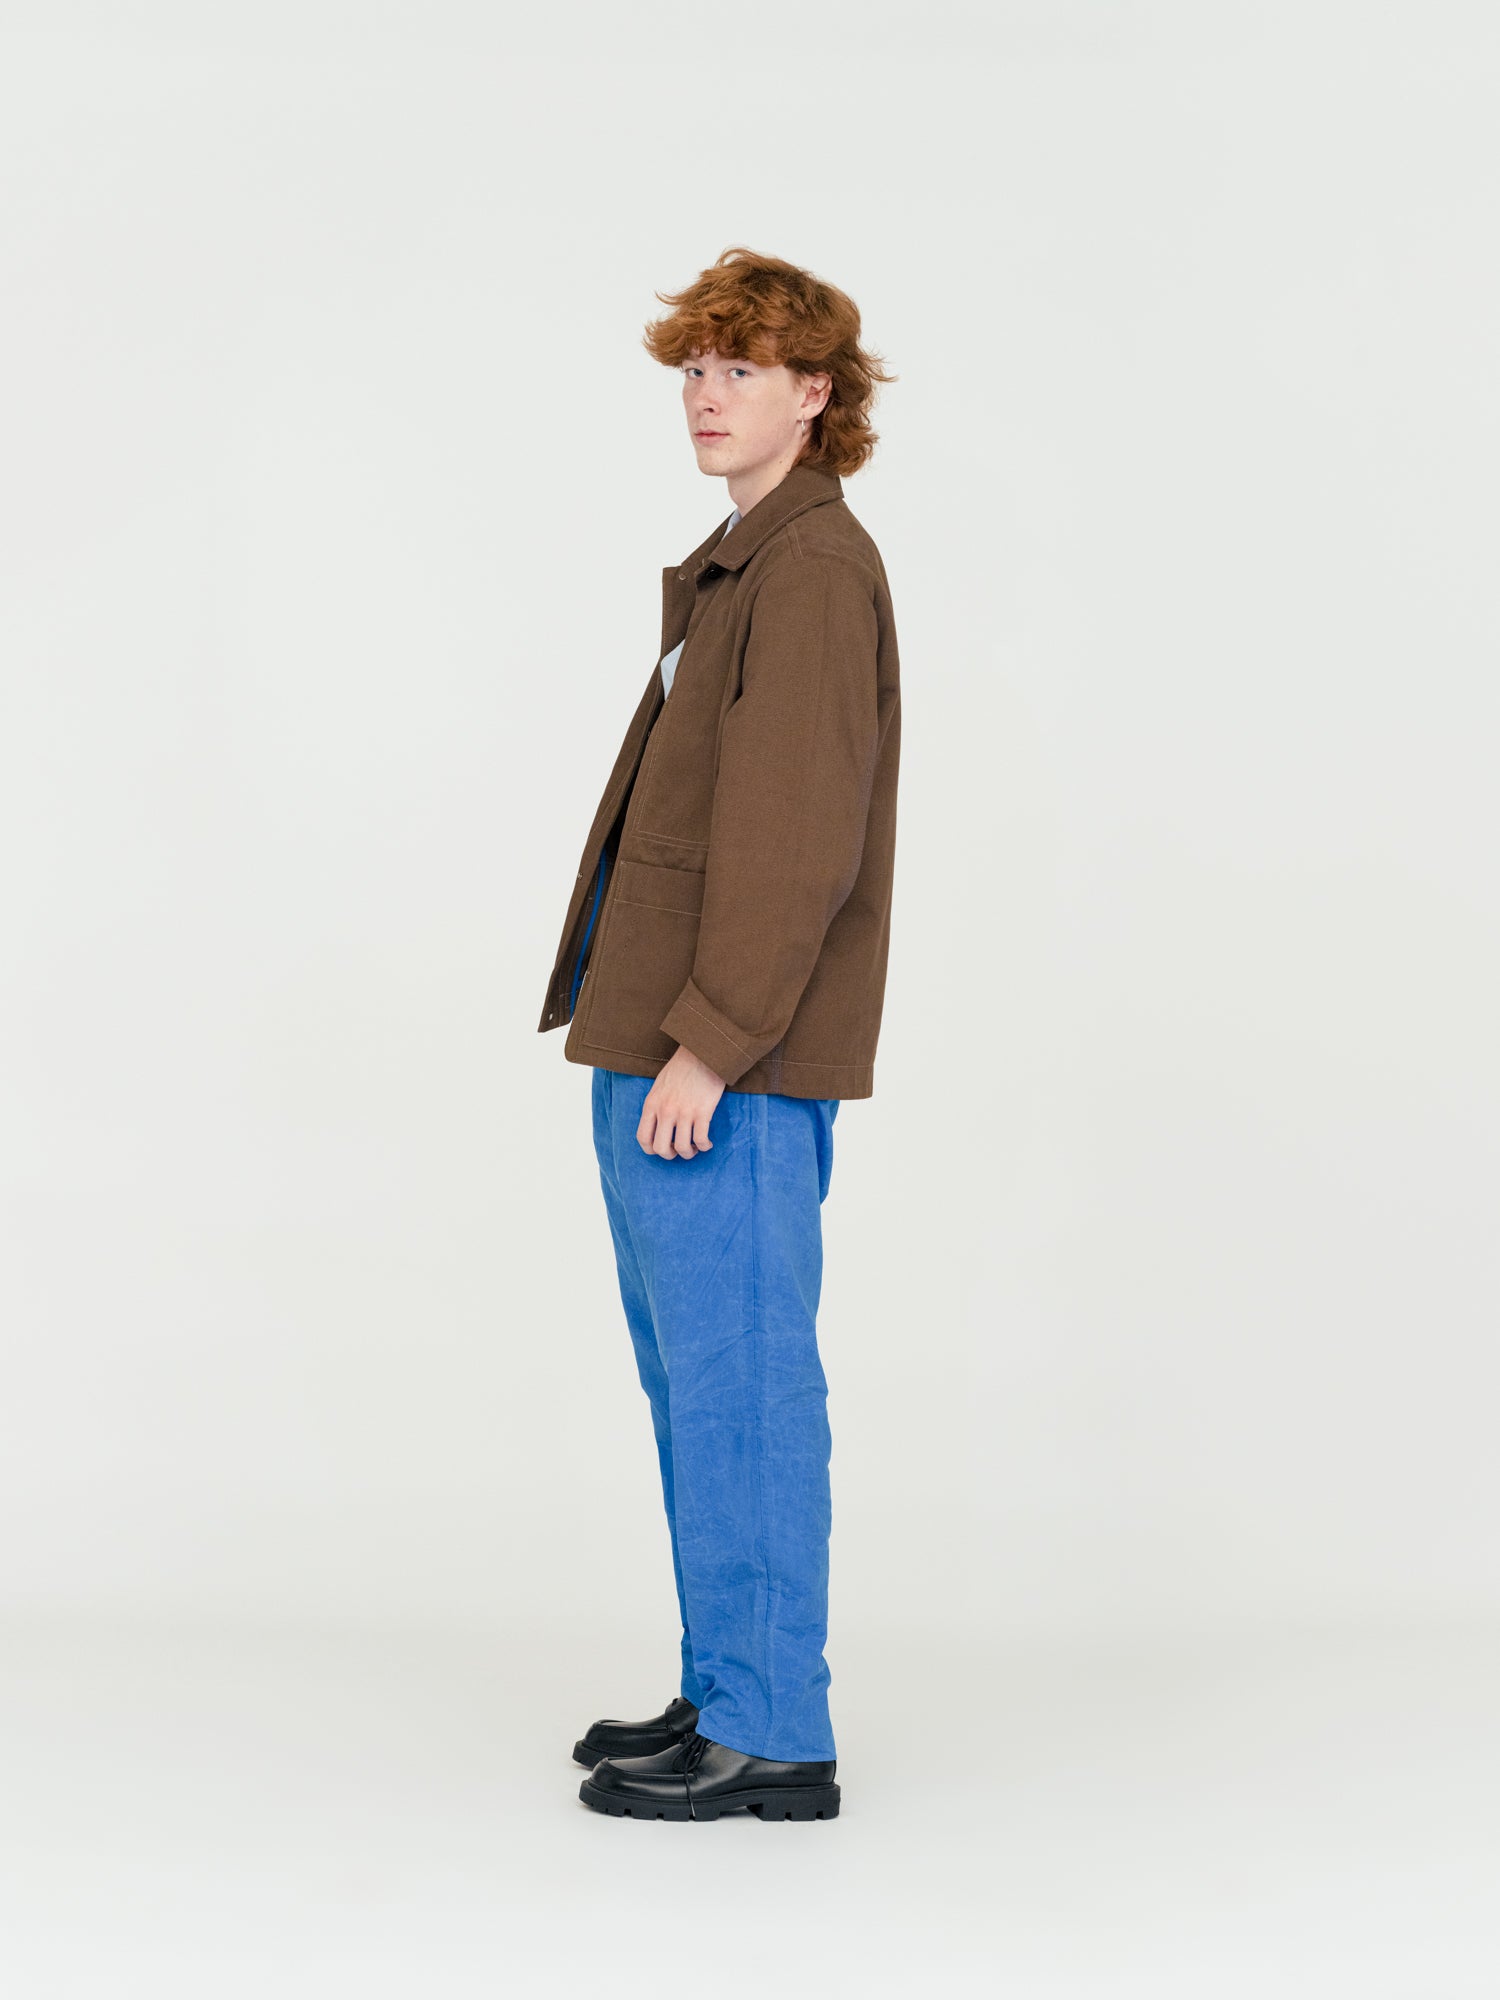 Mikkel is 188 cm and wearing Size 2 (X-Large)